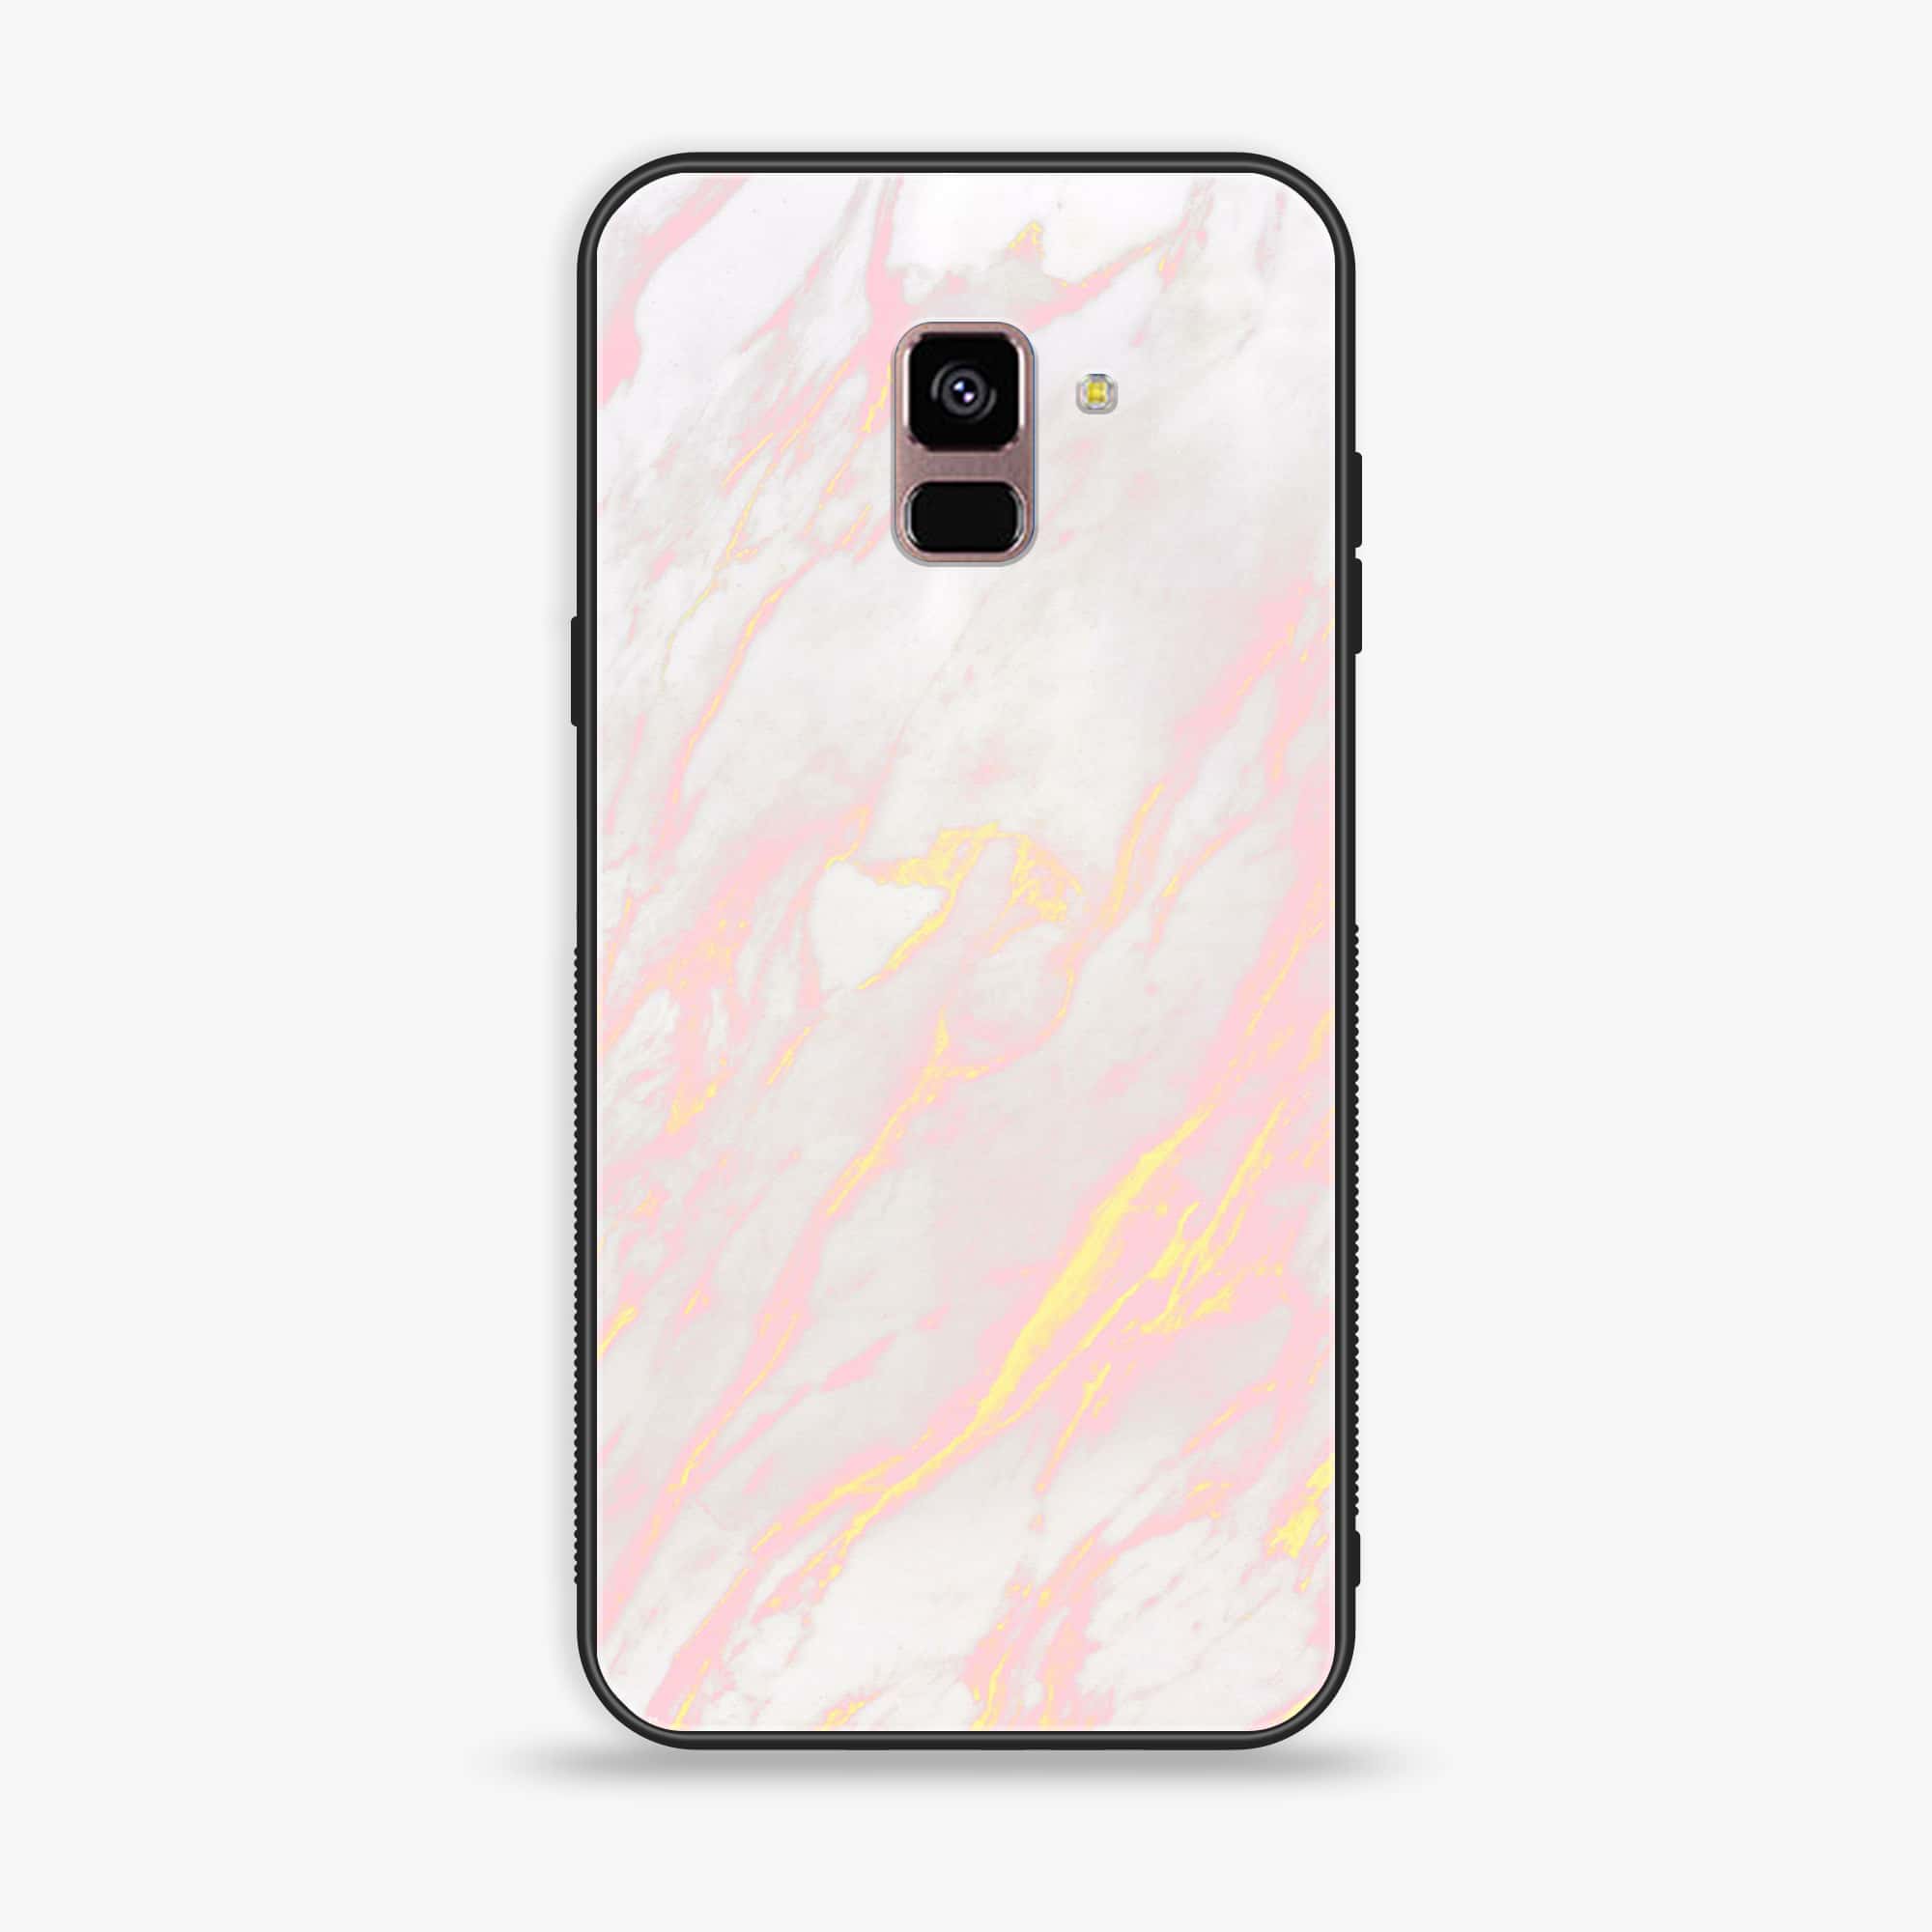 Samsung Galaxy A8+ (2018) - Pink Marble Series - Premium Printed Glass soft Bumper shock Proof Case